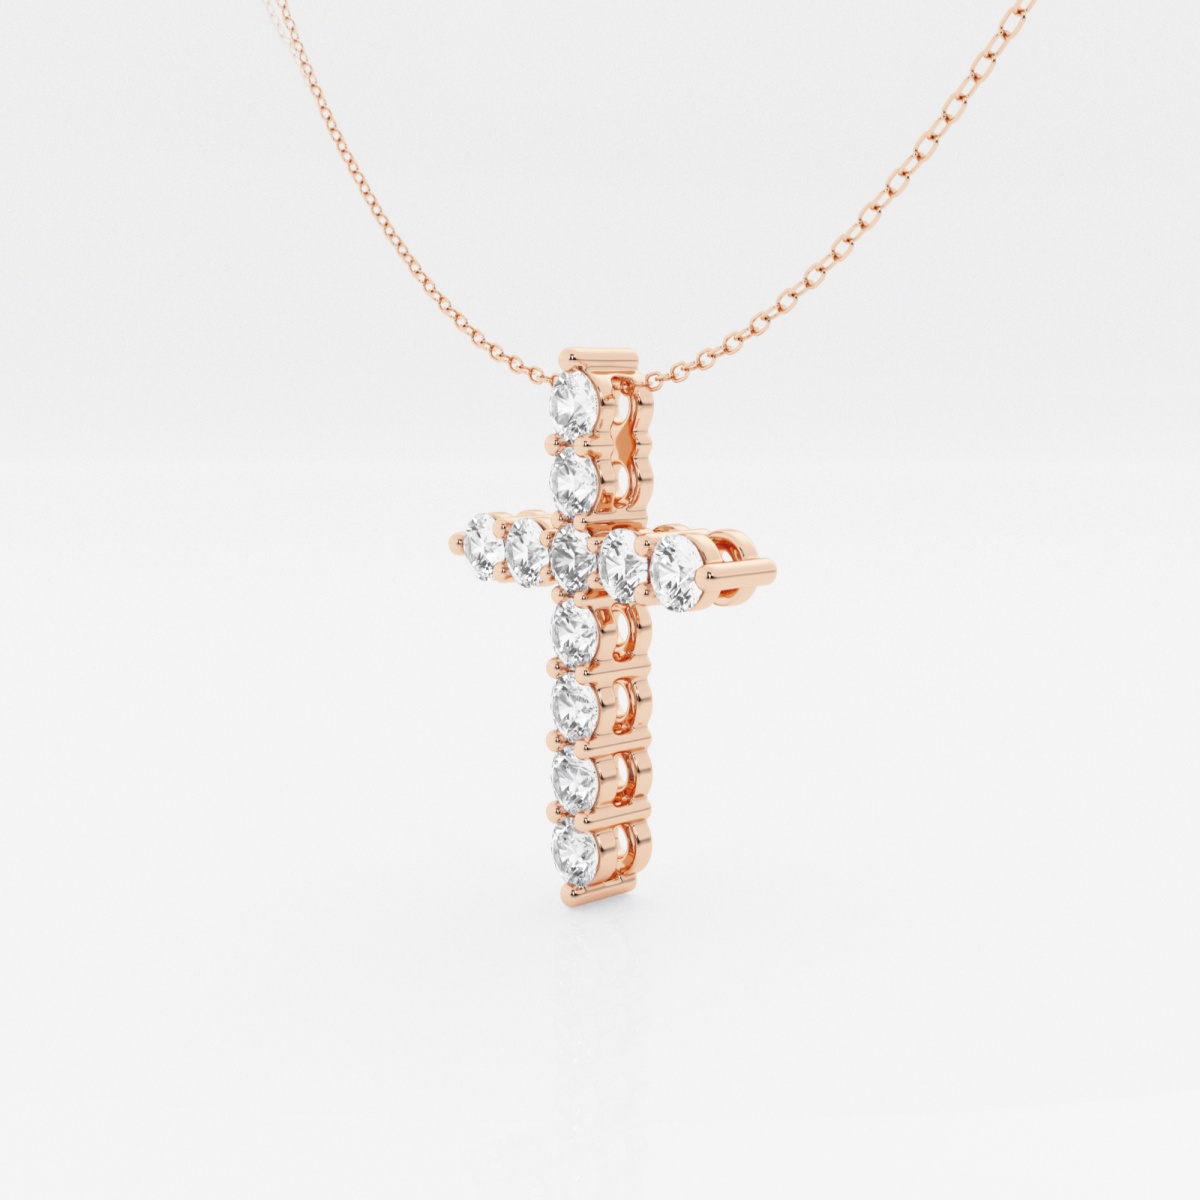 Additional Image 1 for  2 ctw Round Lab Grown Diamond Cross Pendant with Adjustable Chain